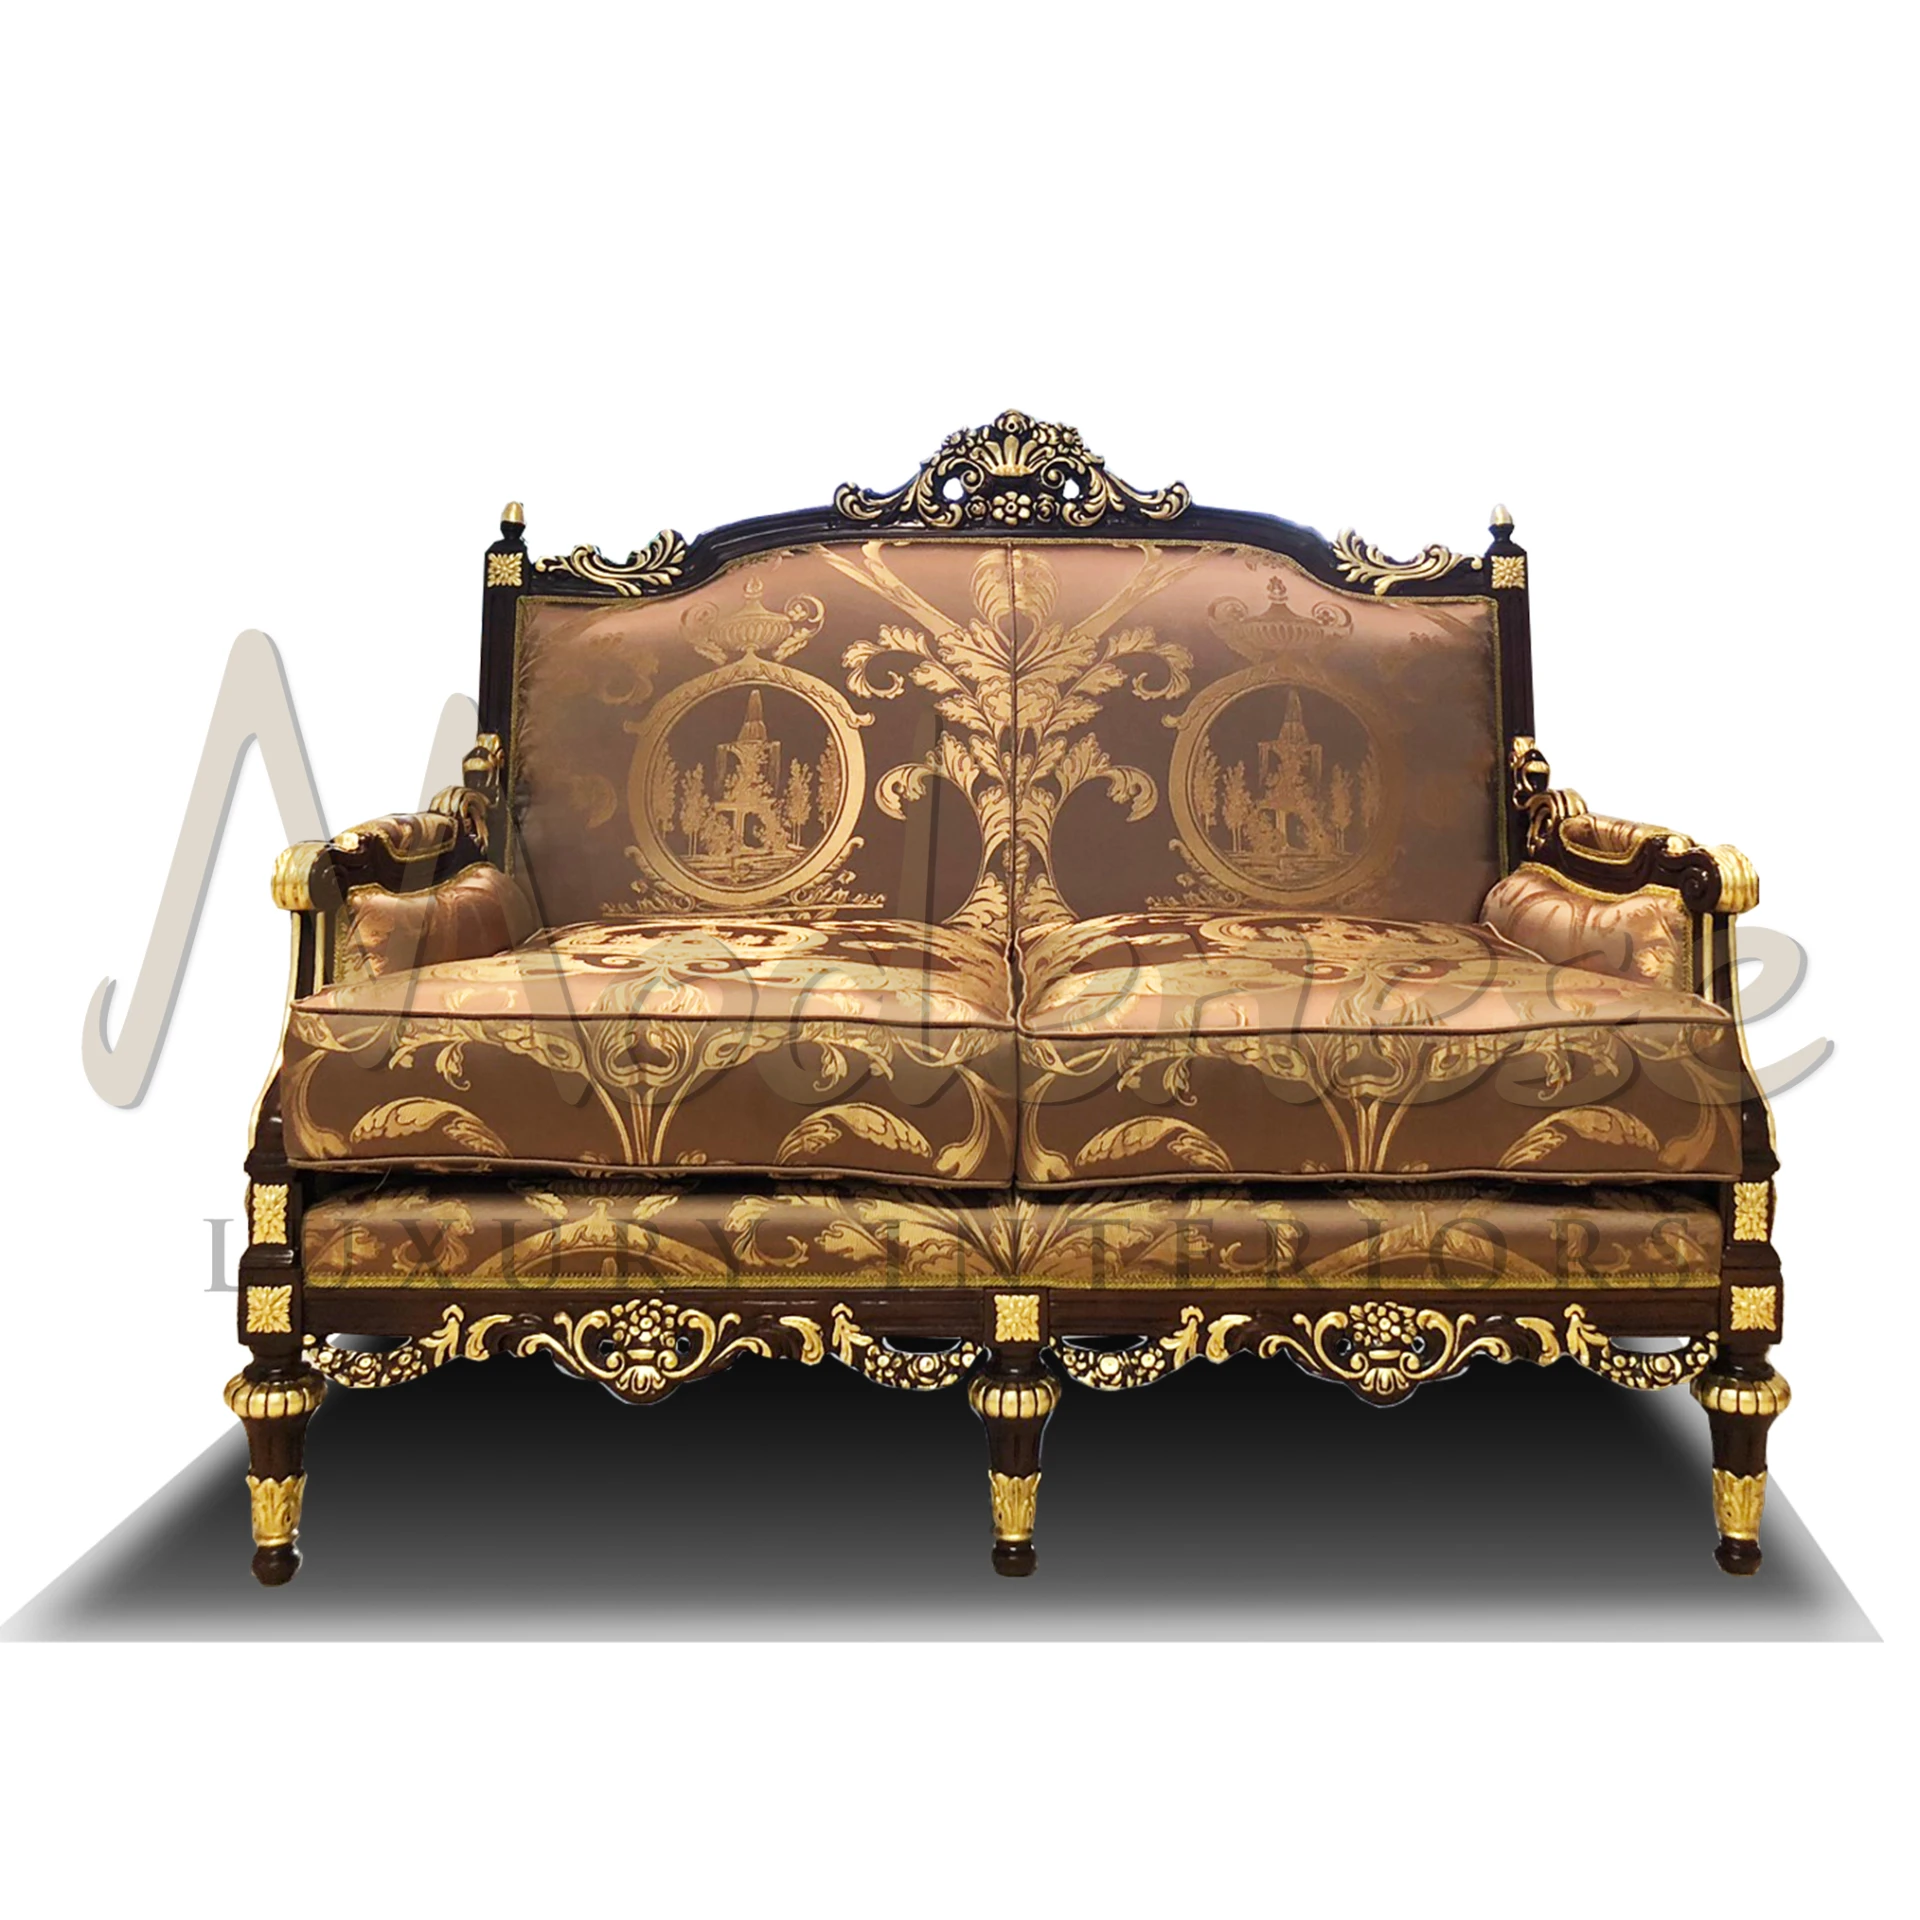 Luxury Baroque Sofa with gold leaf carvings, embodying classical Italian design, perfect for elegant home decor.
